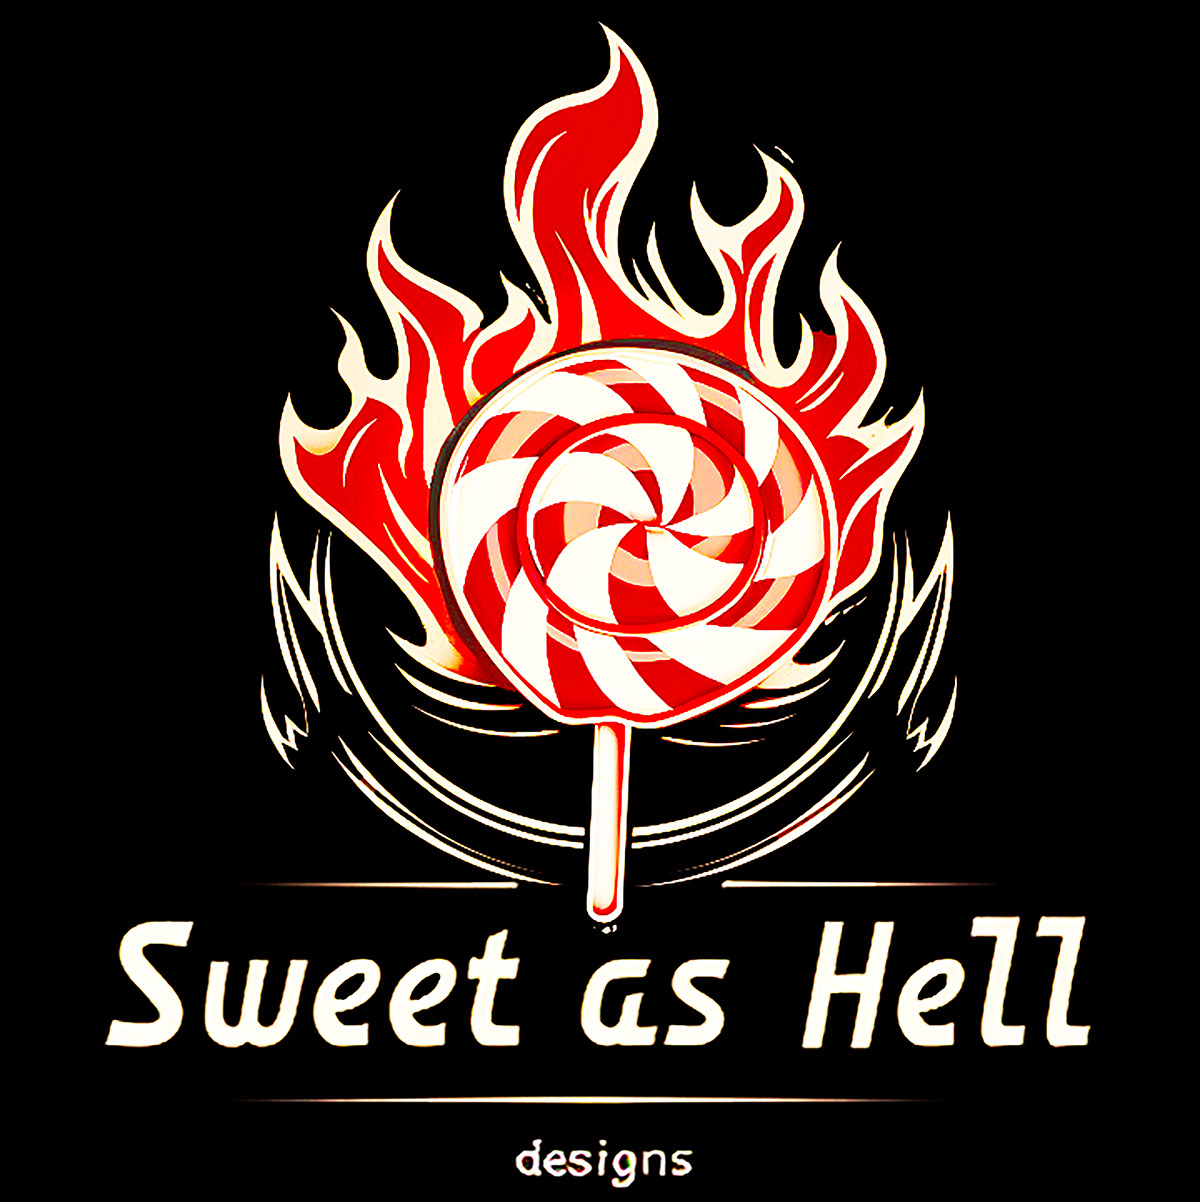 Sweet_As_Hell_Designs_Licensable_Ruffian_no_20 rendition image